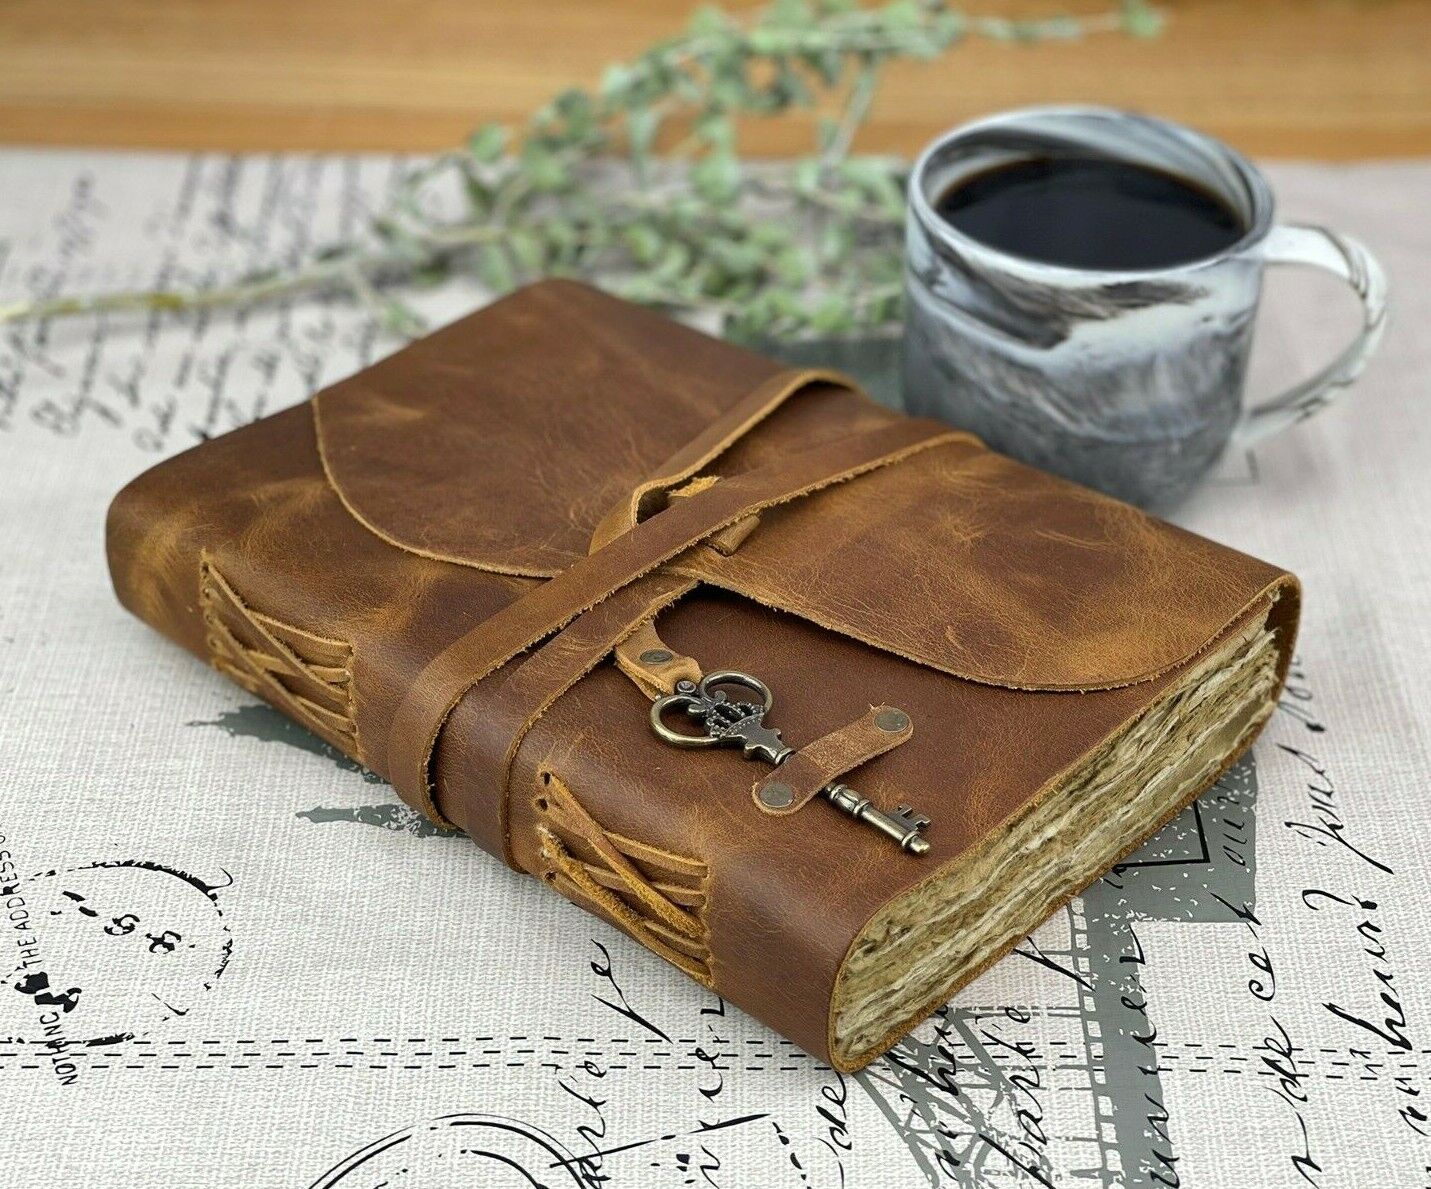 Genuine Leather Journal Vintage Rustic Leather Bound Journal  Deckle Edge Paper